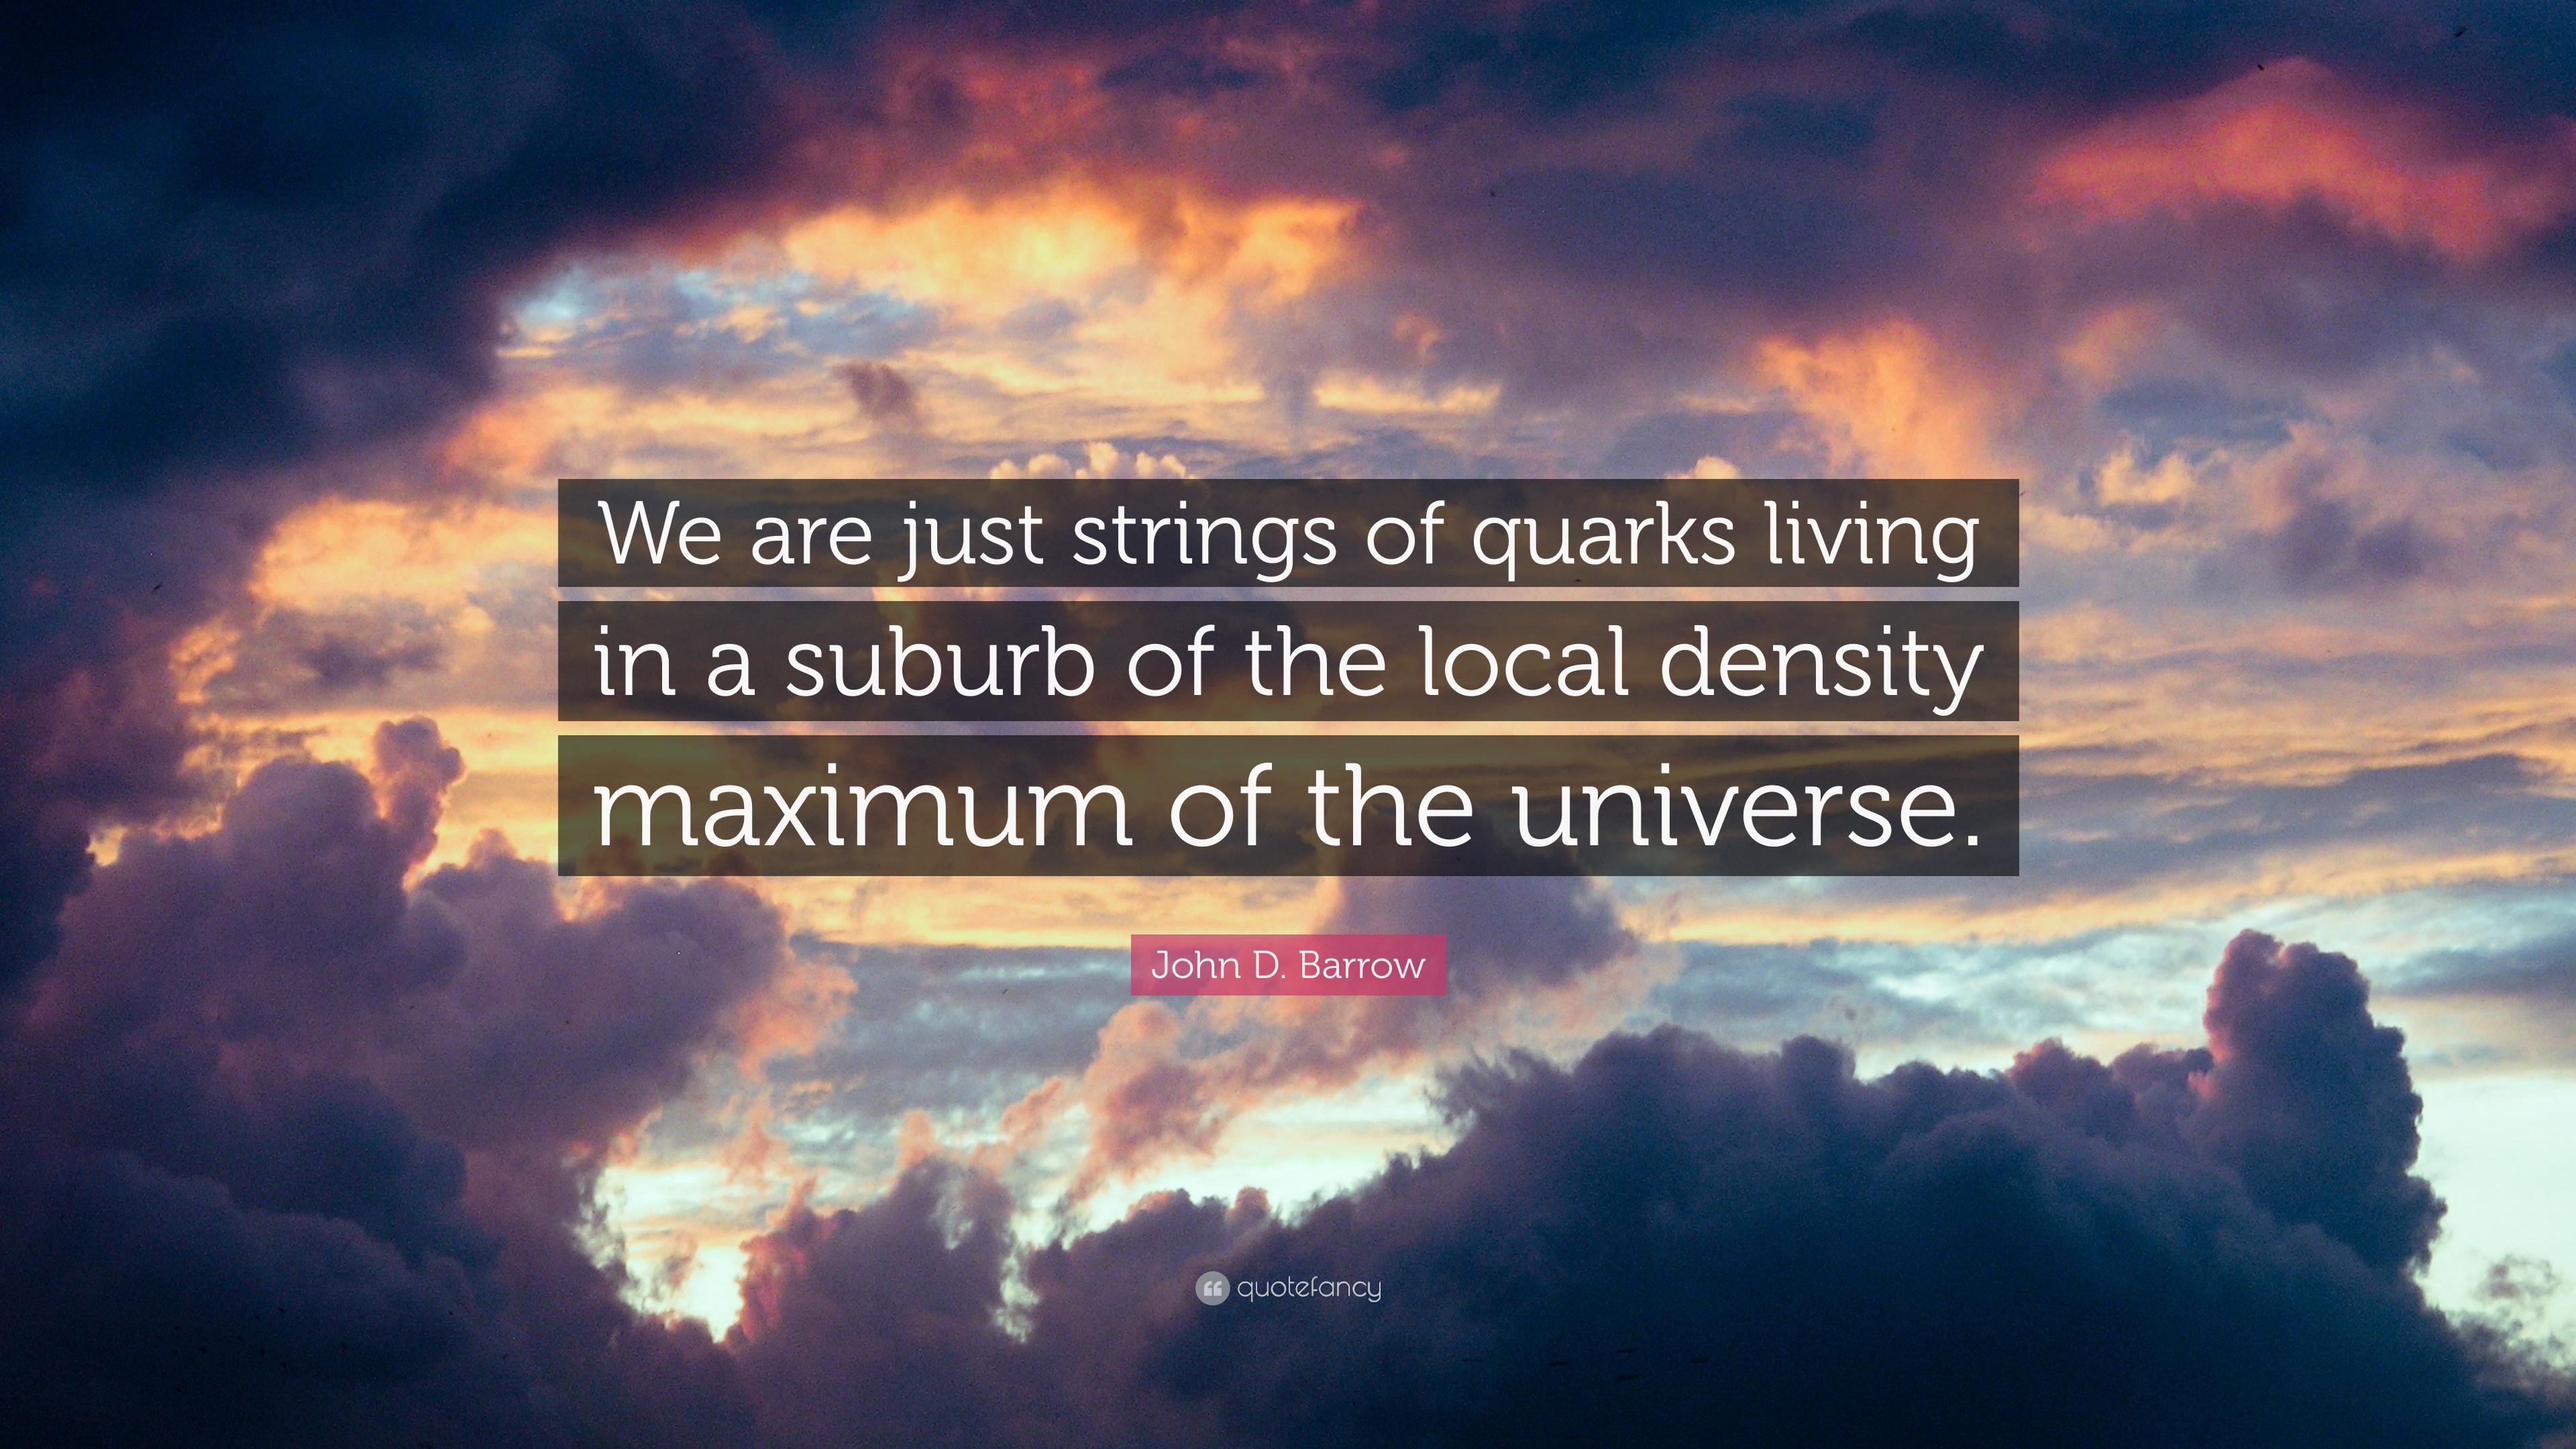 John D. Barrow Quote: “We are just strings of quarks living